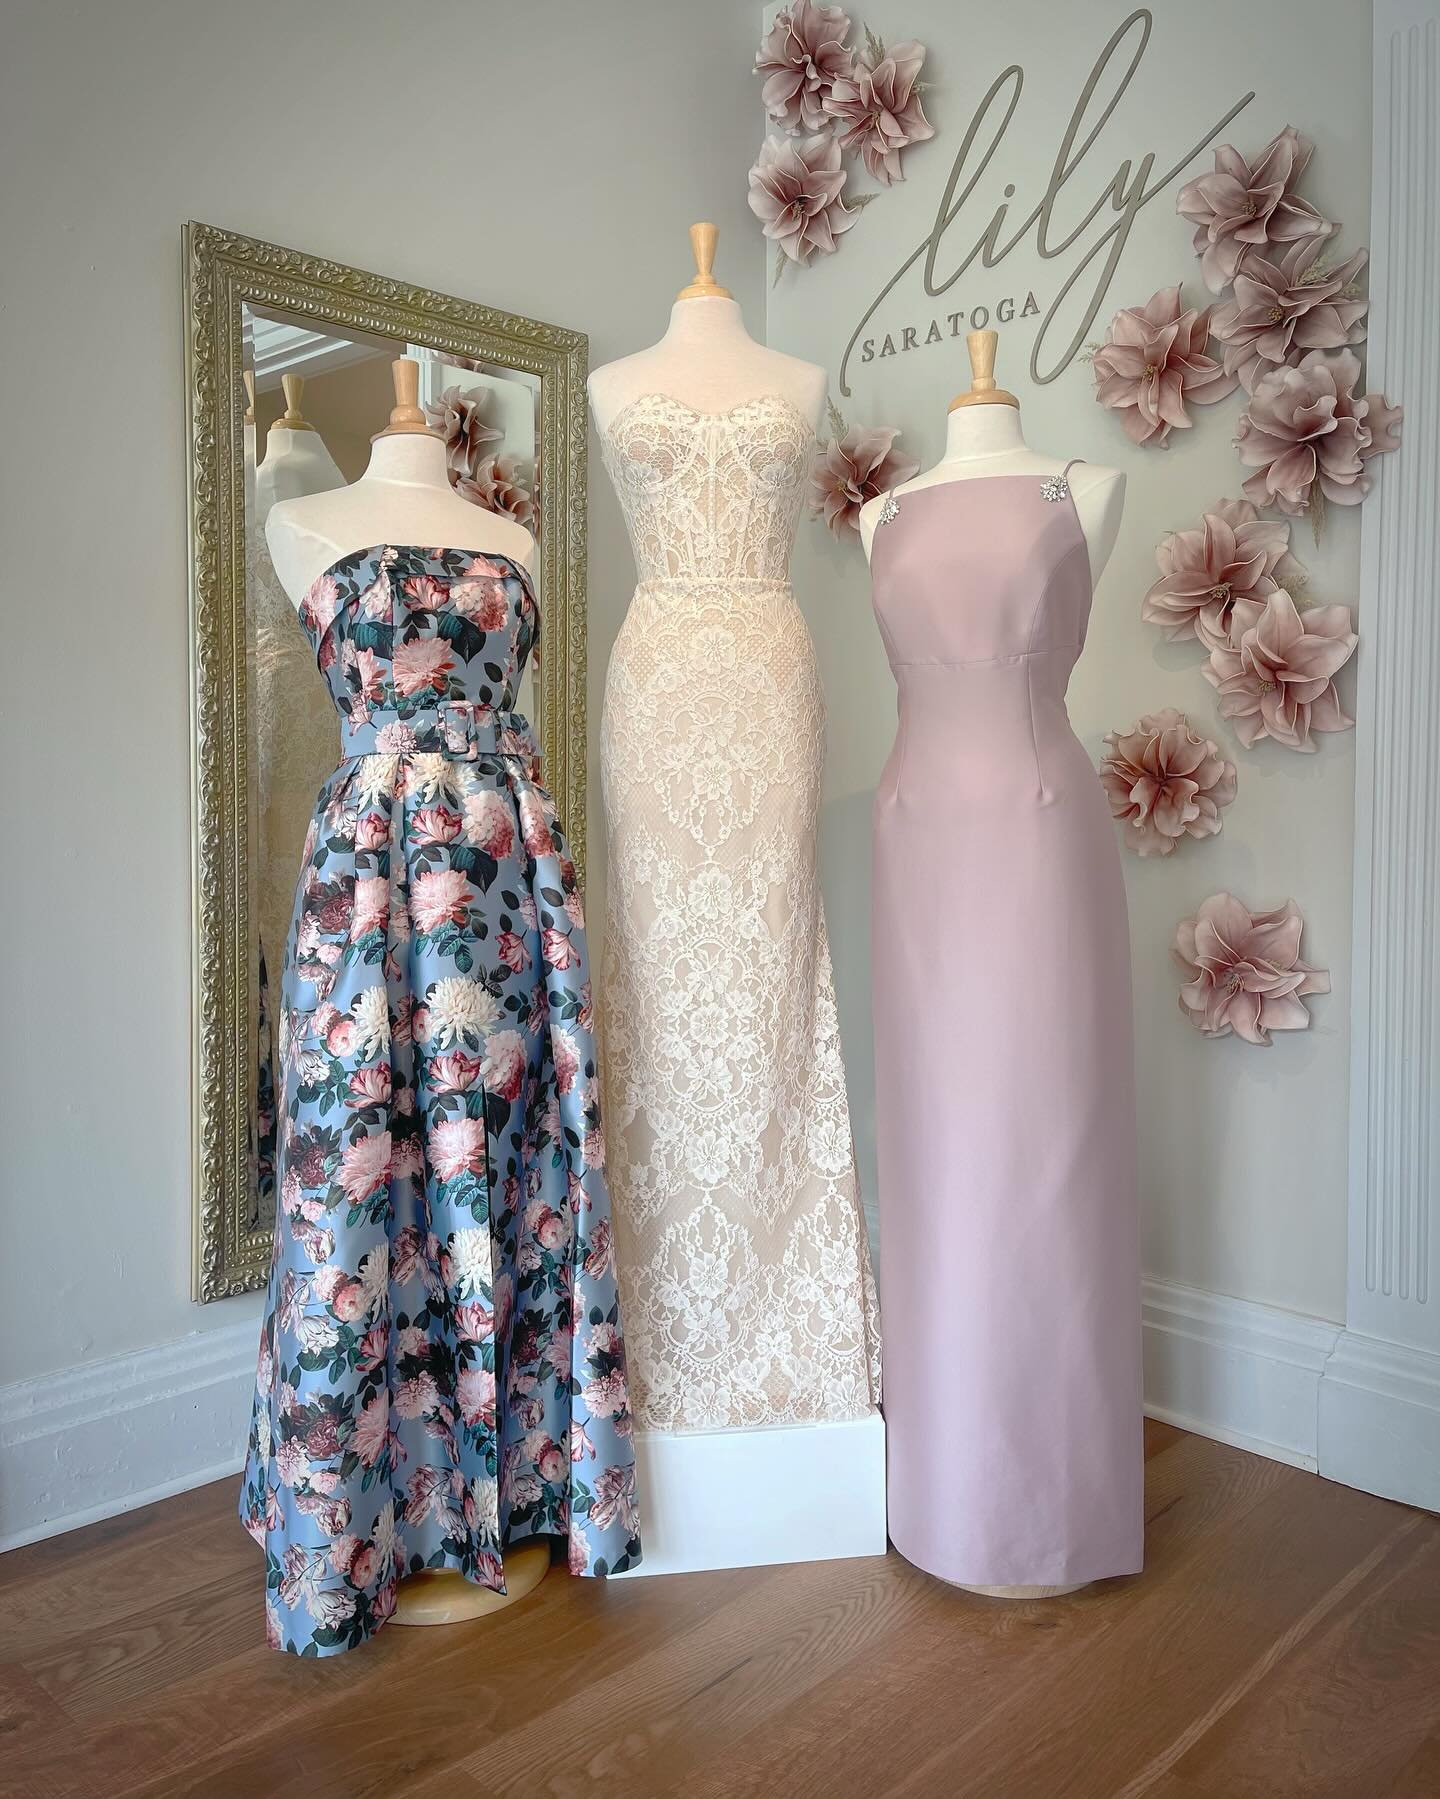 This one&rsquo;s for the moms 💐

This week&rsquo;s #windowwednesday features our oh so romantic new @madewithlovebridal &lsquo;Winnie&rsquo; in exclusive Sand colorway (she comes with sheer removable sleeves not pictured!) and two mother of the brid